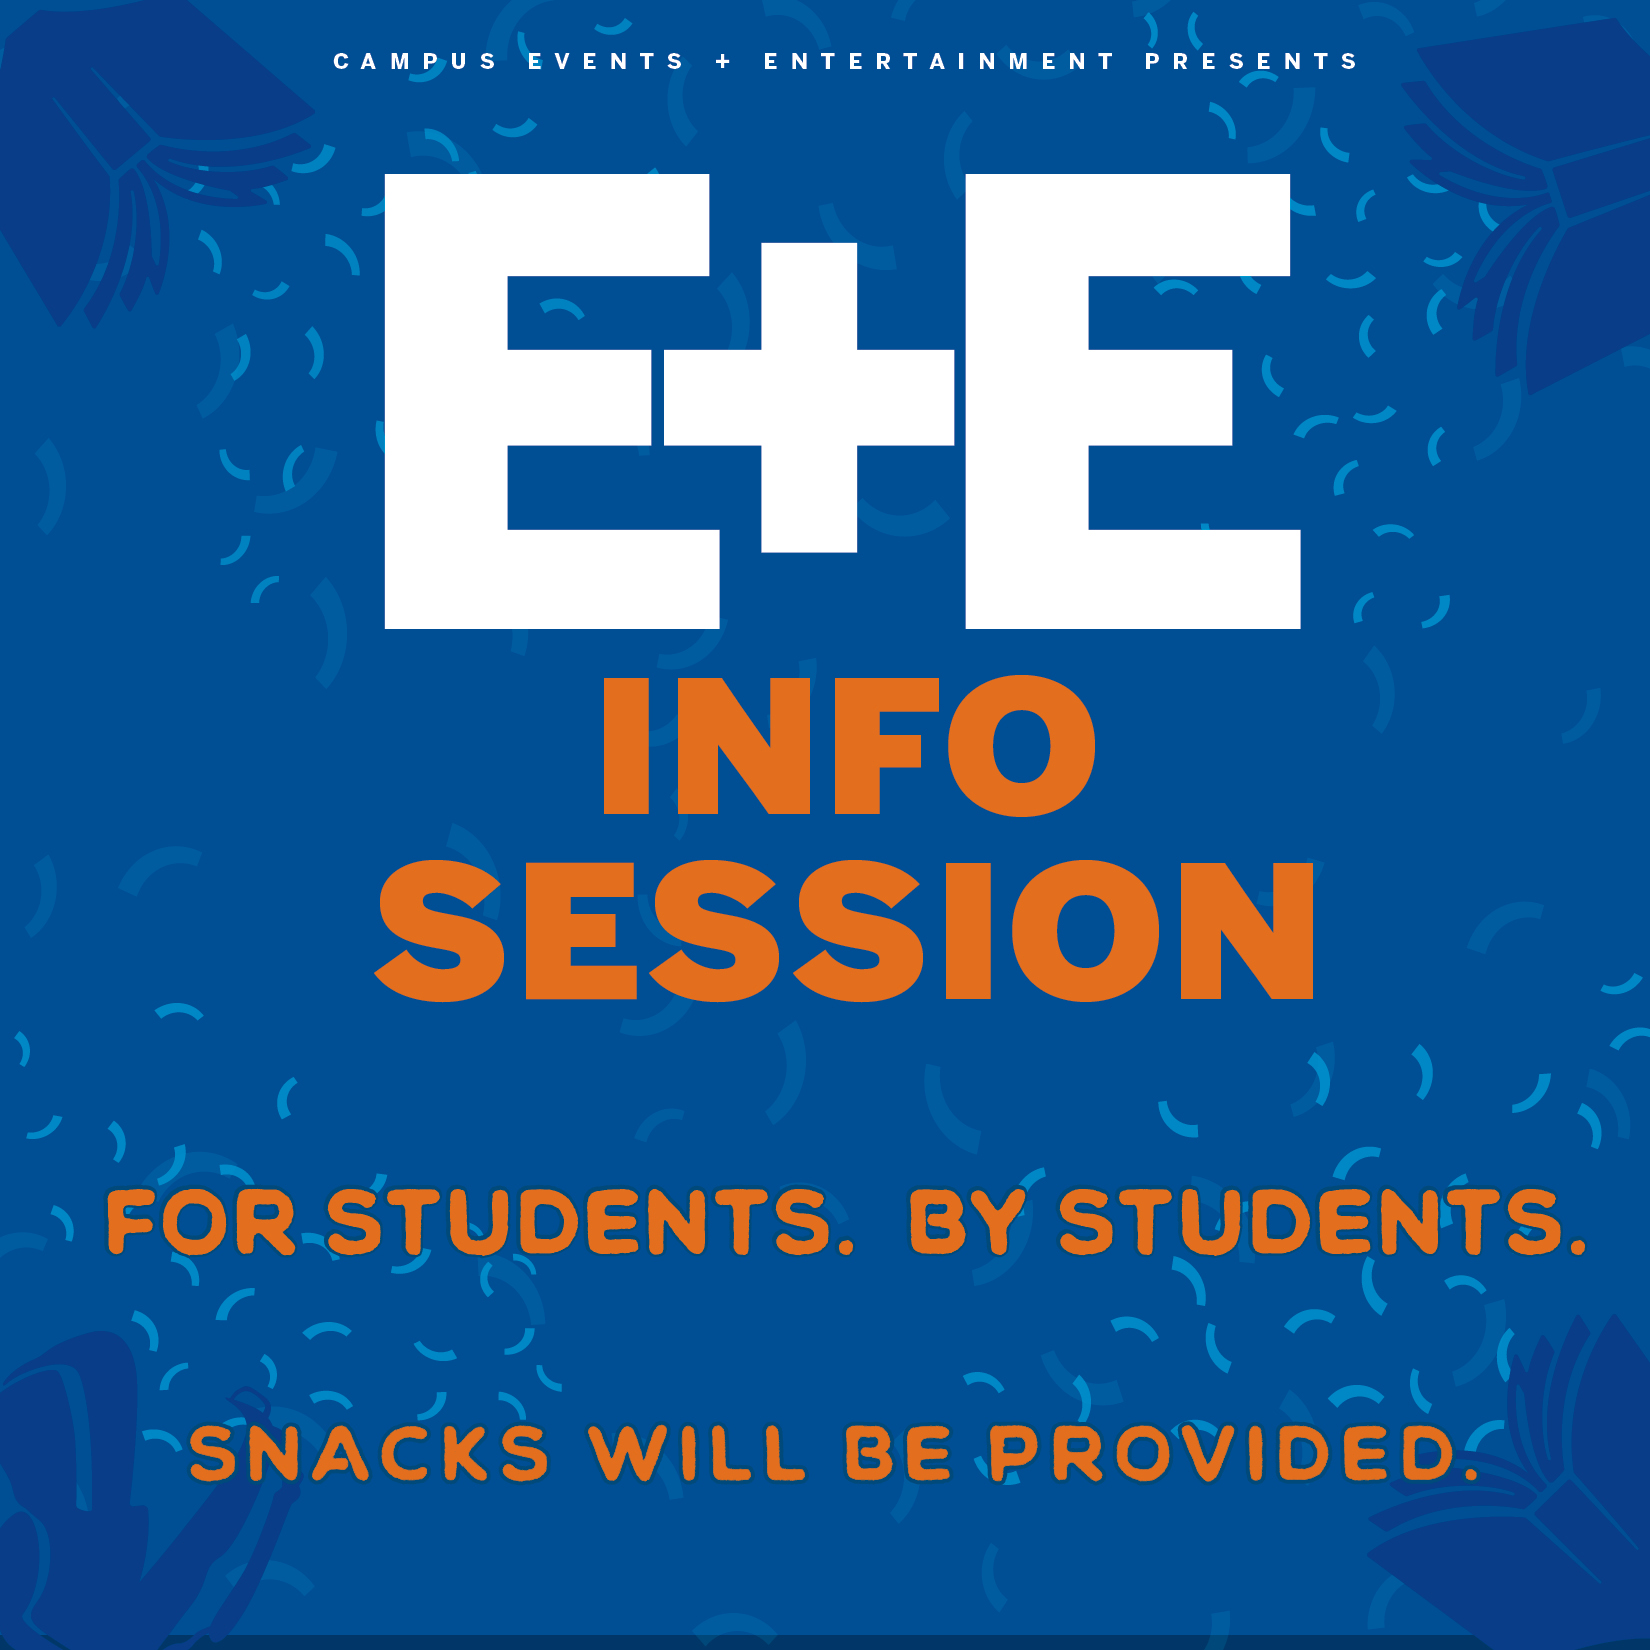 On a blue background with orange text, Campus Events + Entertainment presents the 2021 E+E Info Session, for students by students. Snacks will be provided.